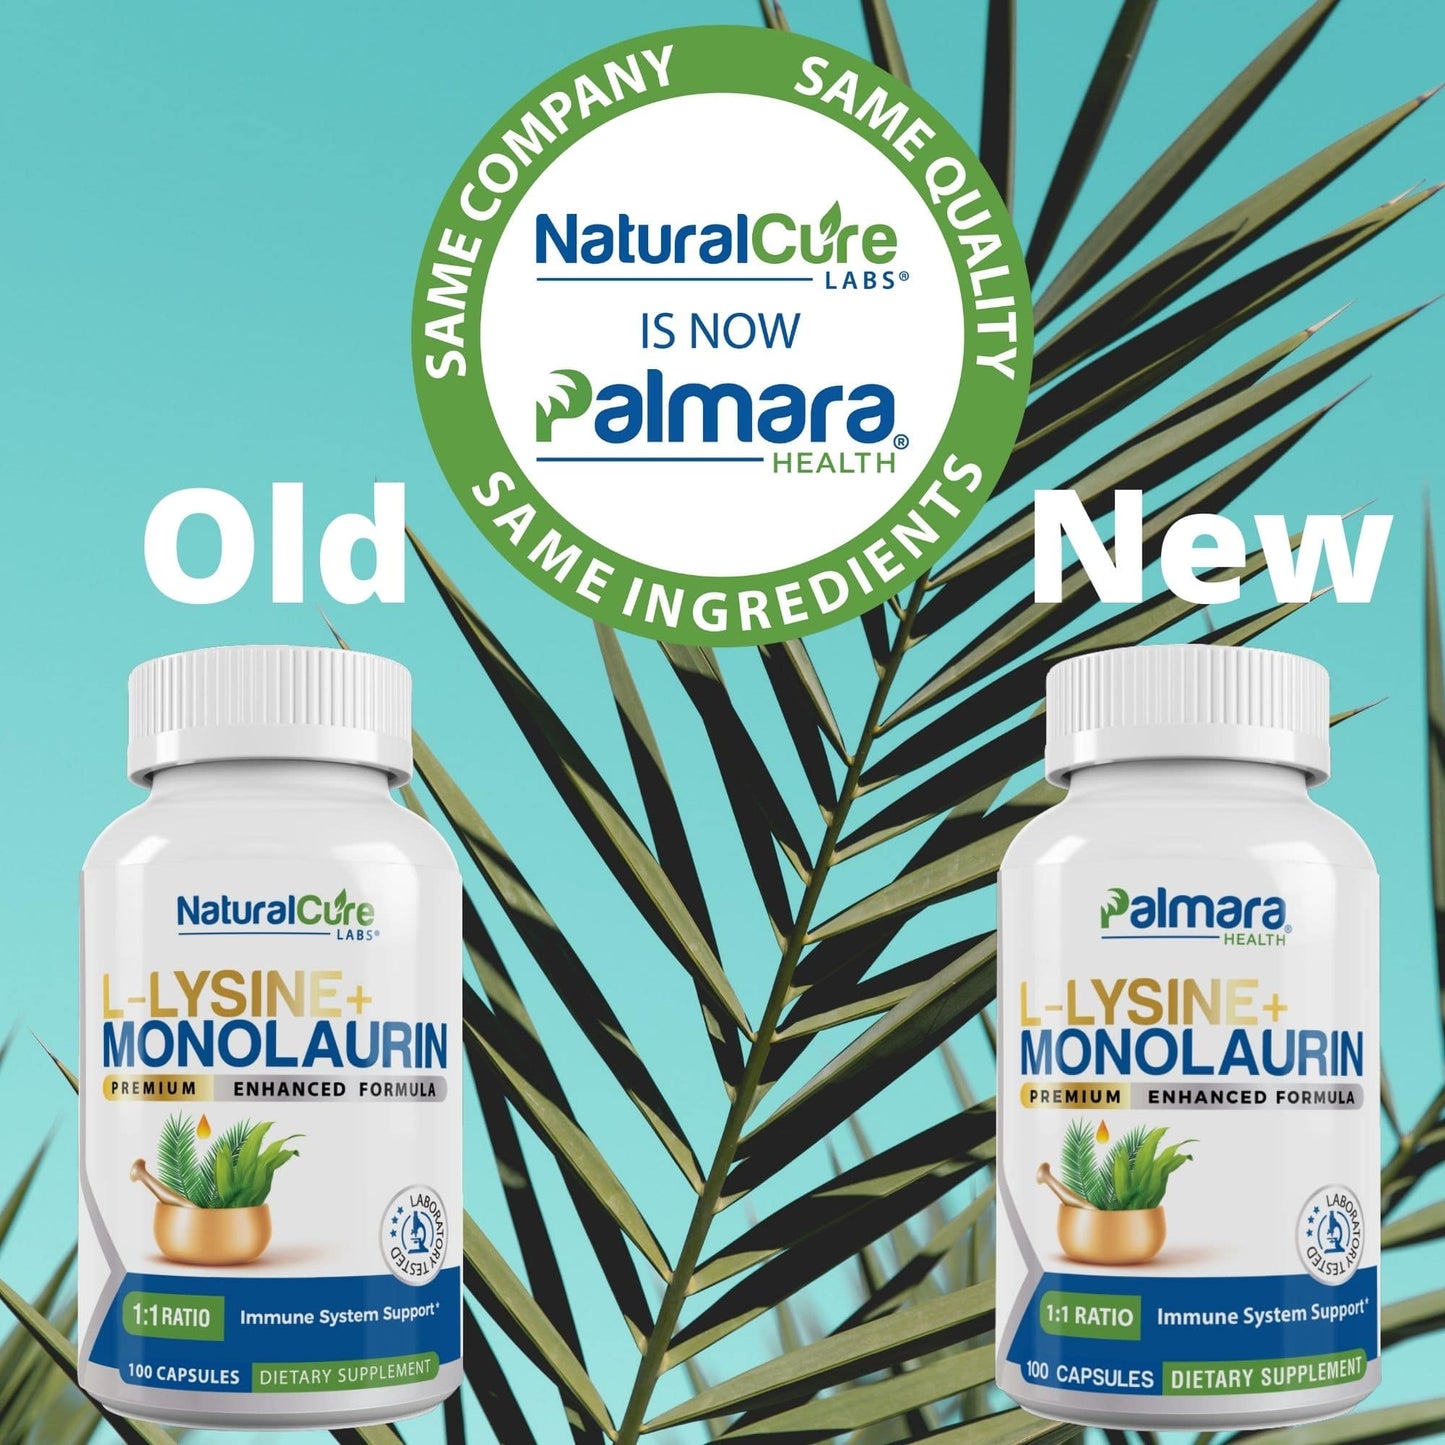 
                  
                    Image showcasing a rebranding transition from Natural Cure Labs to Palmara Health, with two bottles of L-Lysine + Monolaurin supplements side by side. 
                  
                